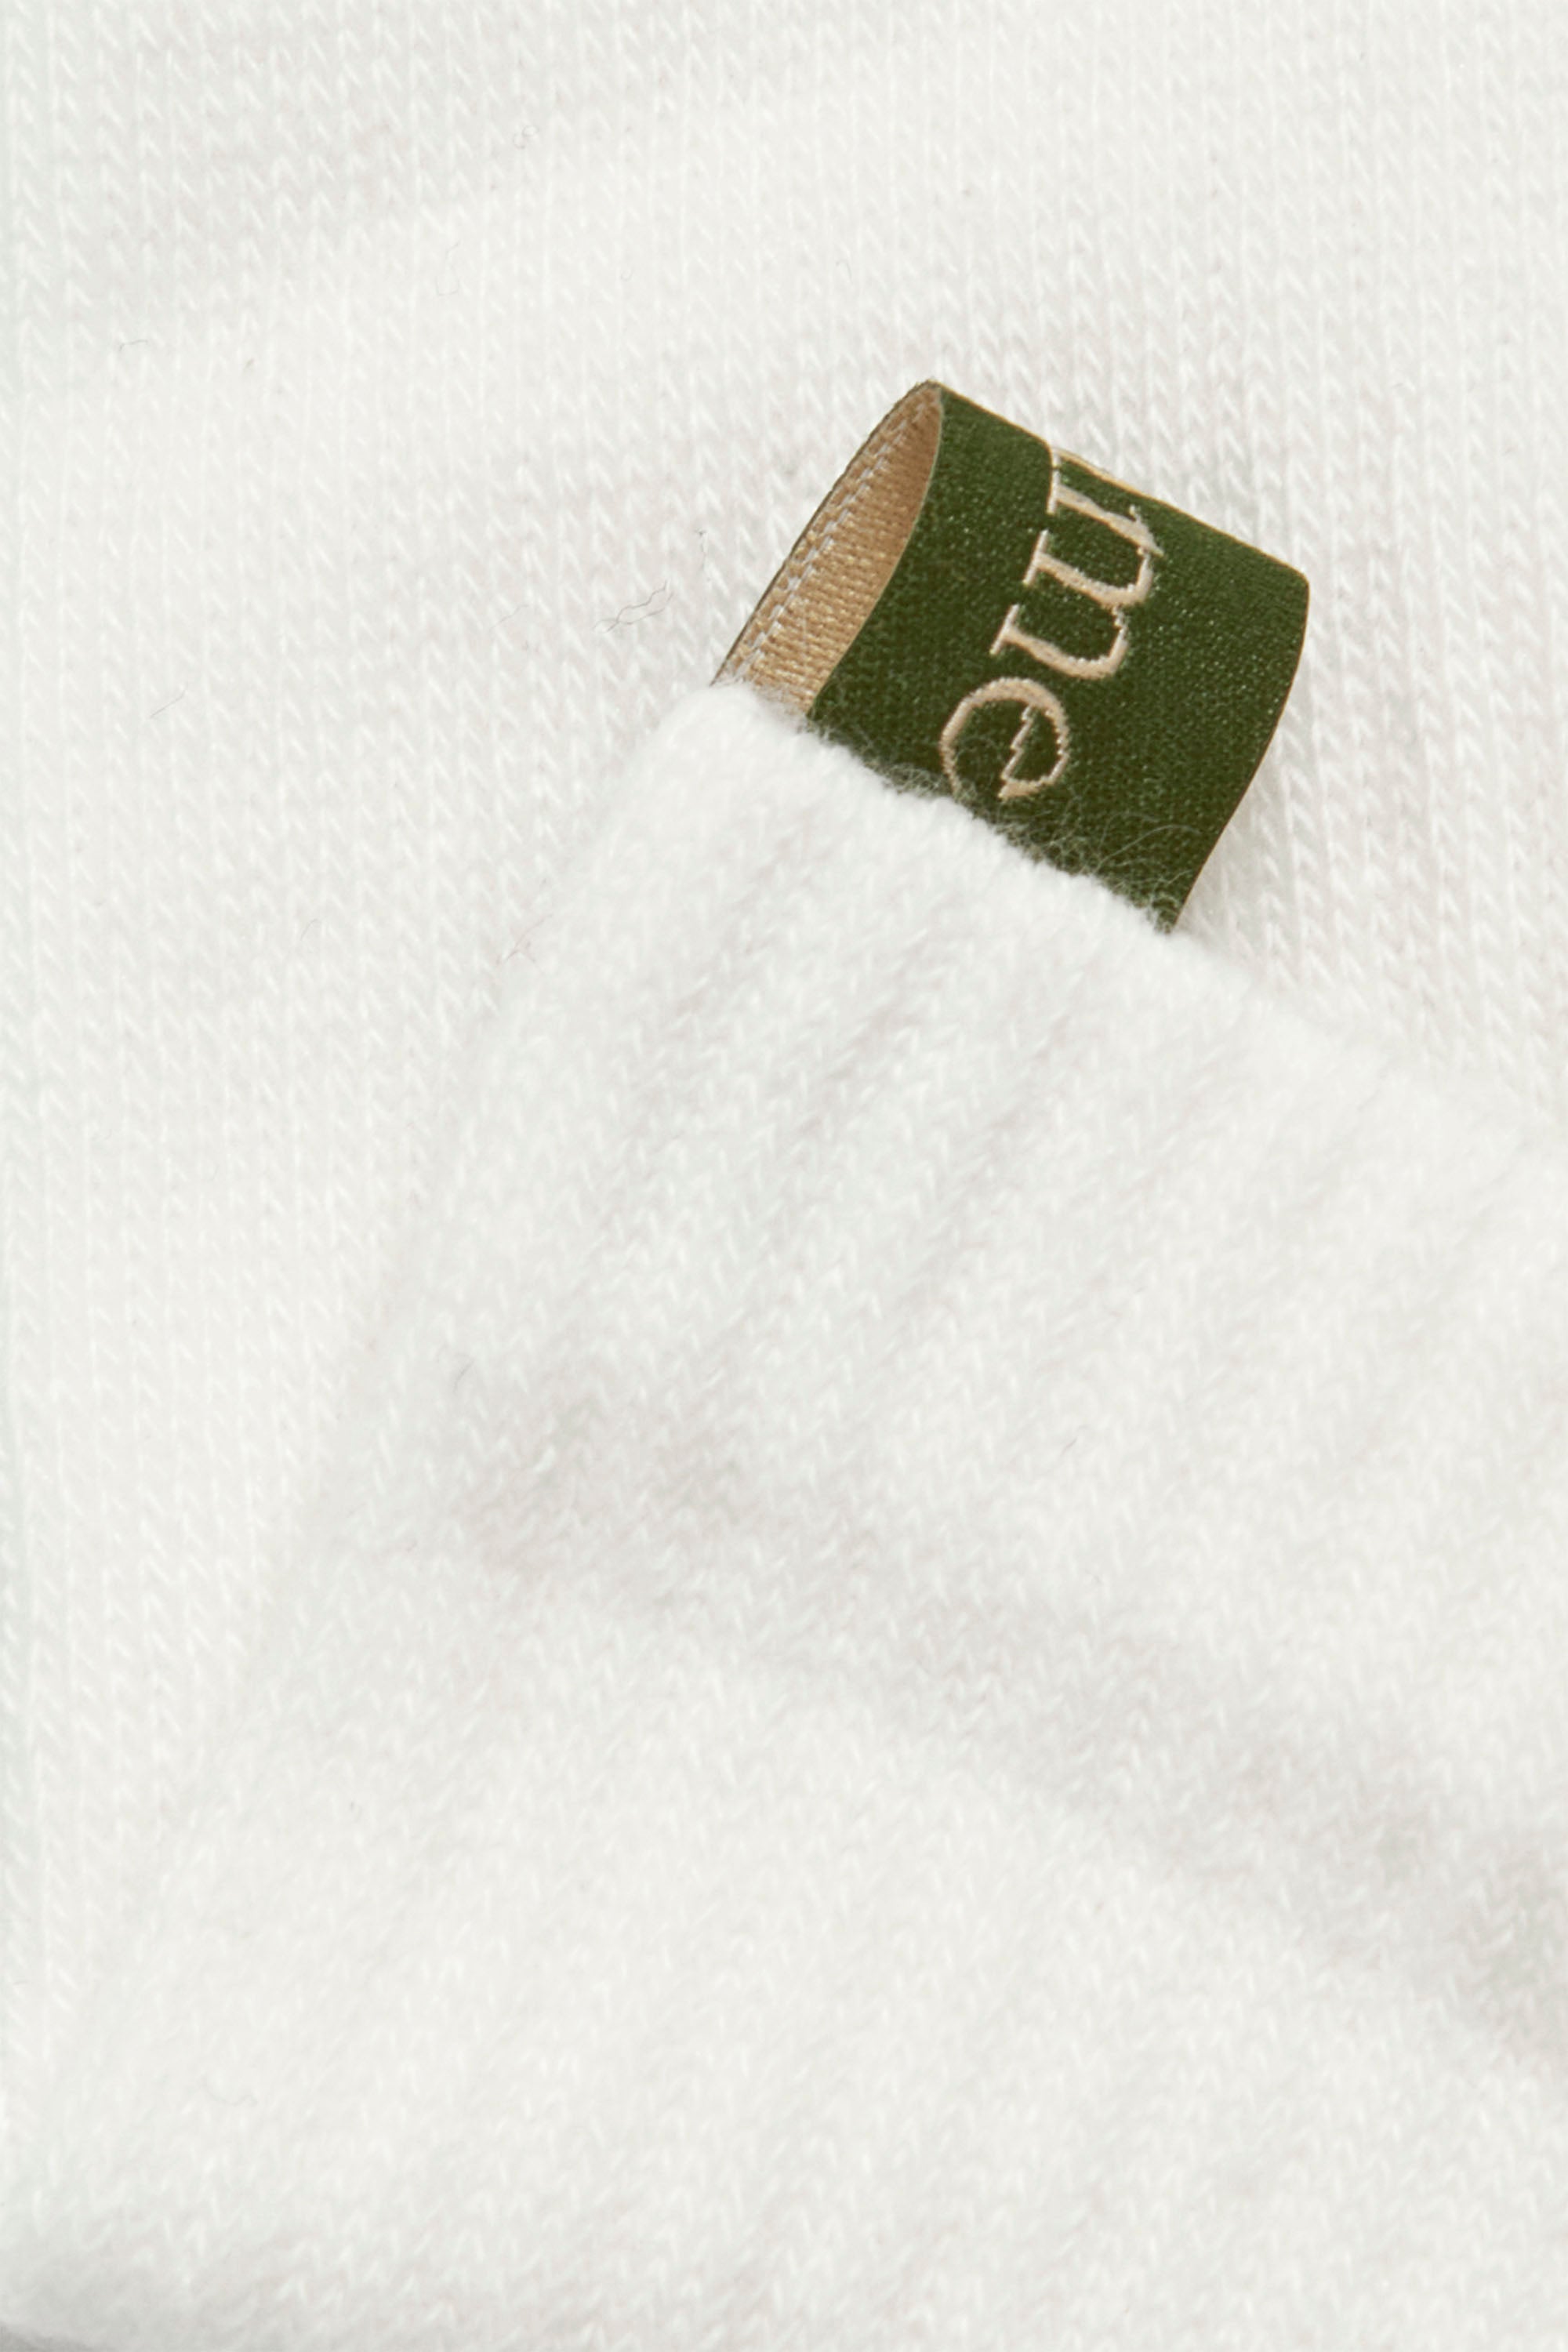 Ribbon tag cuff detail of The Tube Sock, White with green tag, GOTS certified Organic Cotton, by Comme Si